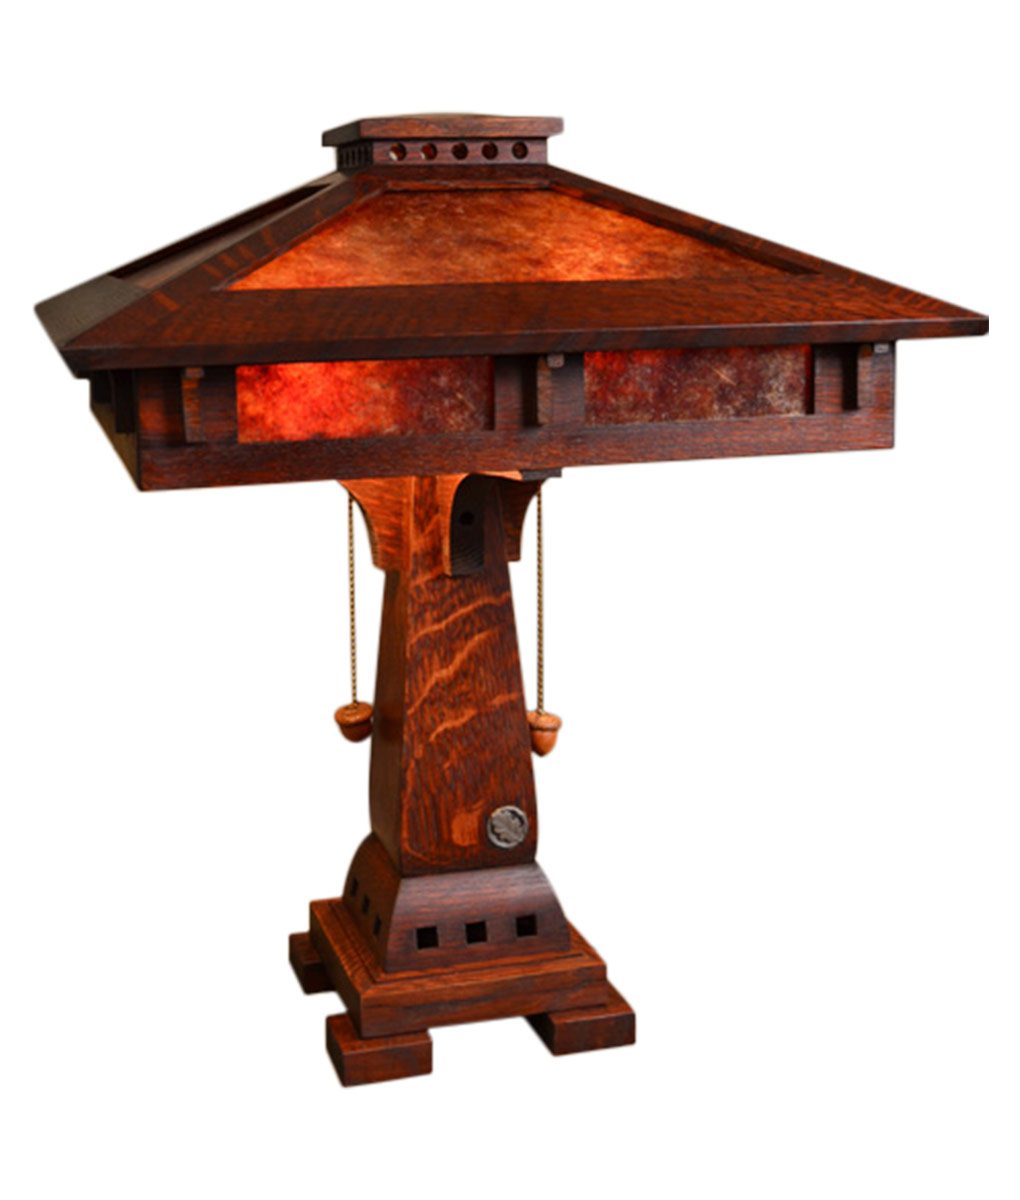 Prairie Craftsman Table Lamp, Mission Style Table Lamp Shades